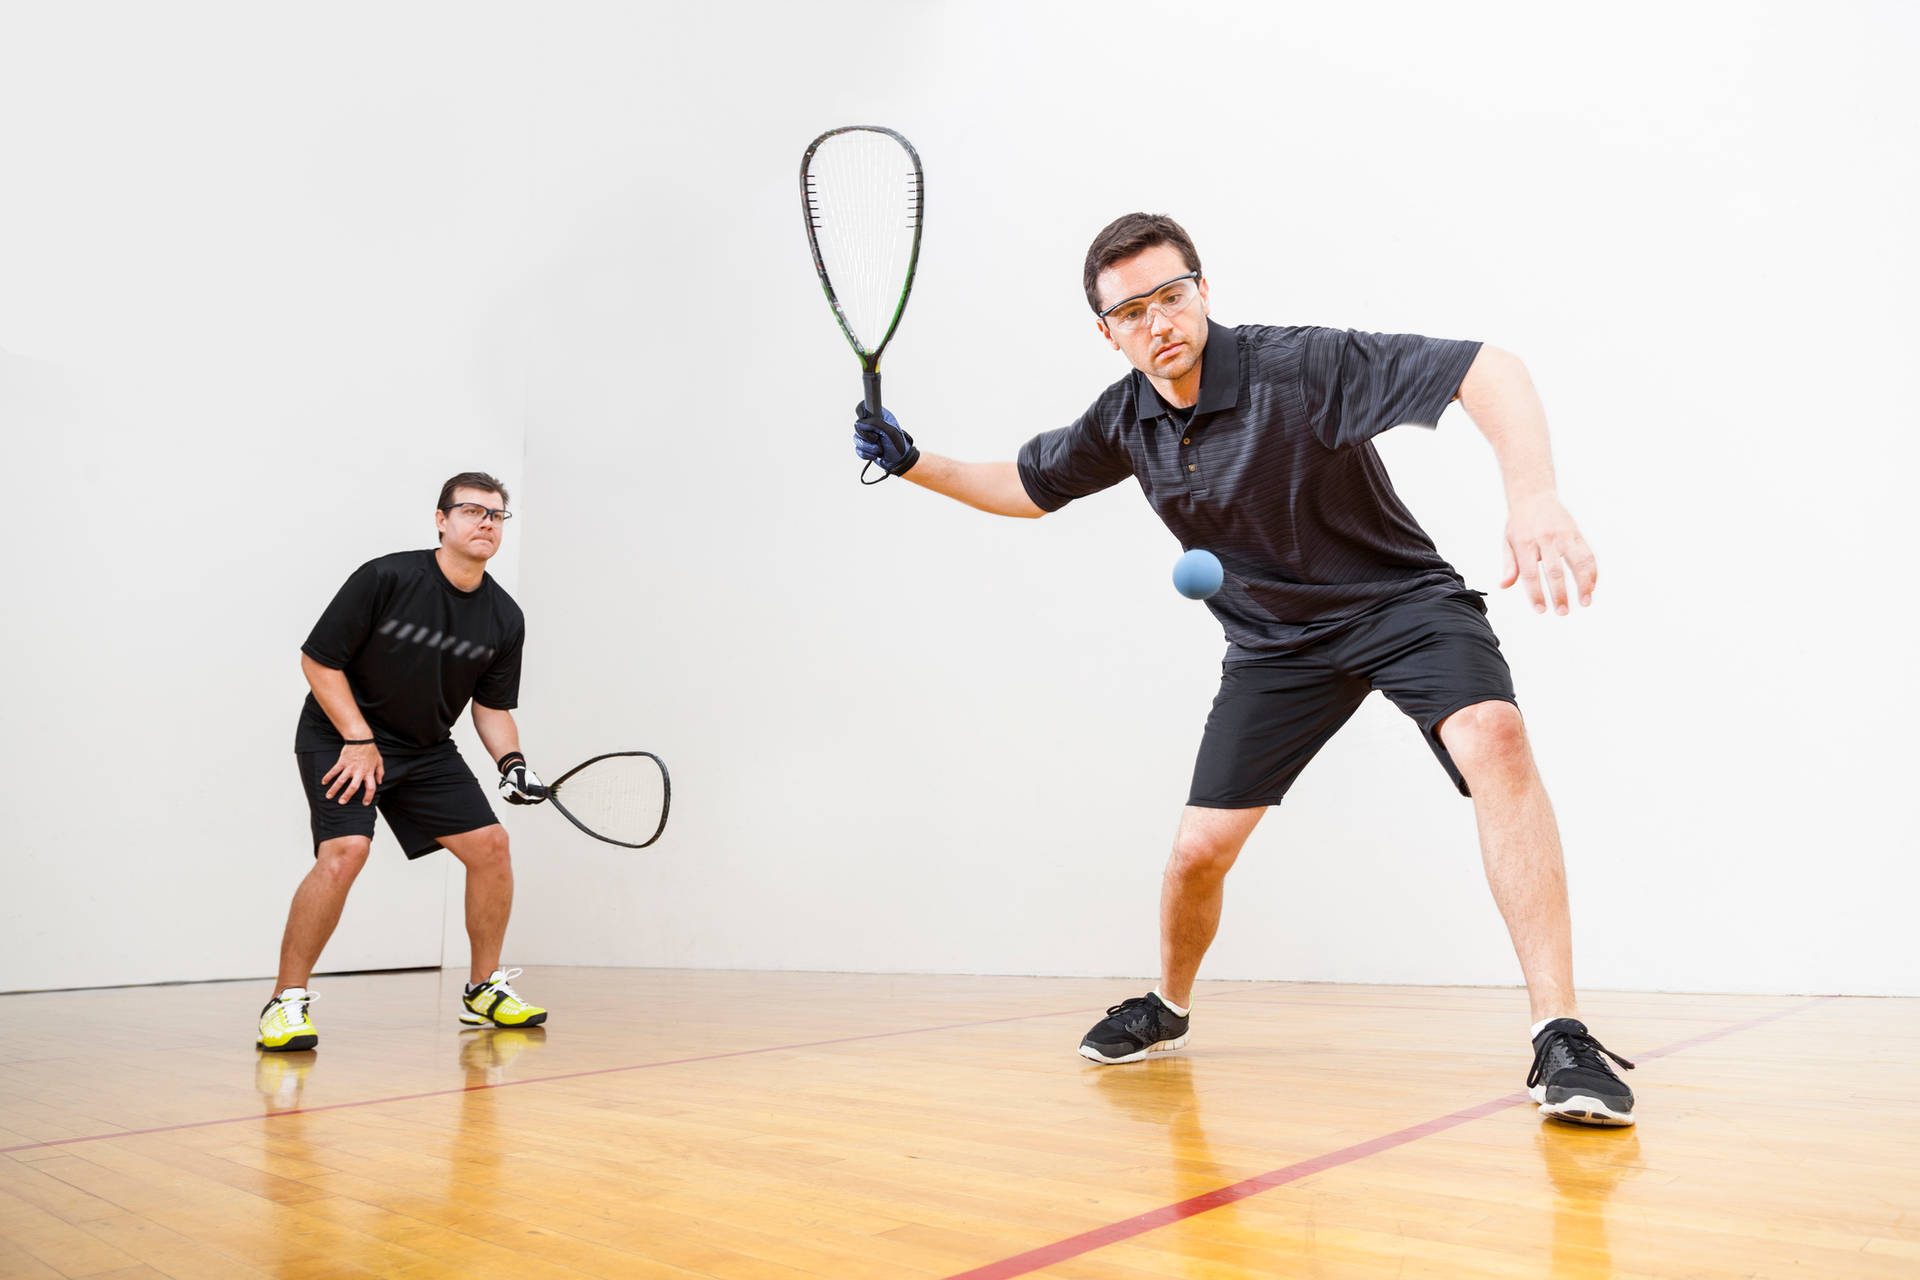 Racquetball Attack And Receive Form Wallpaper